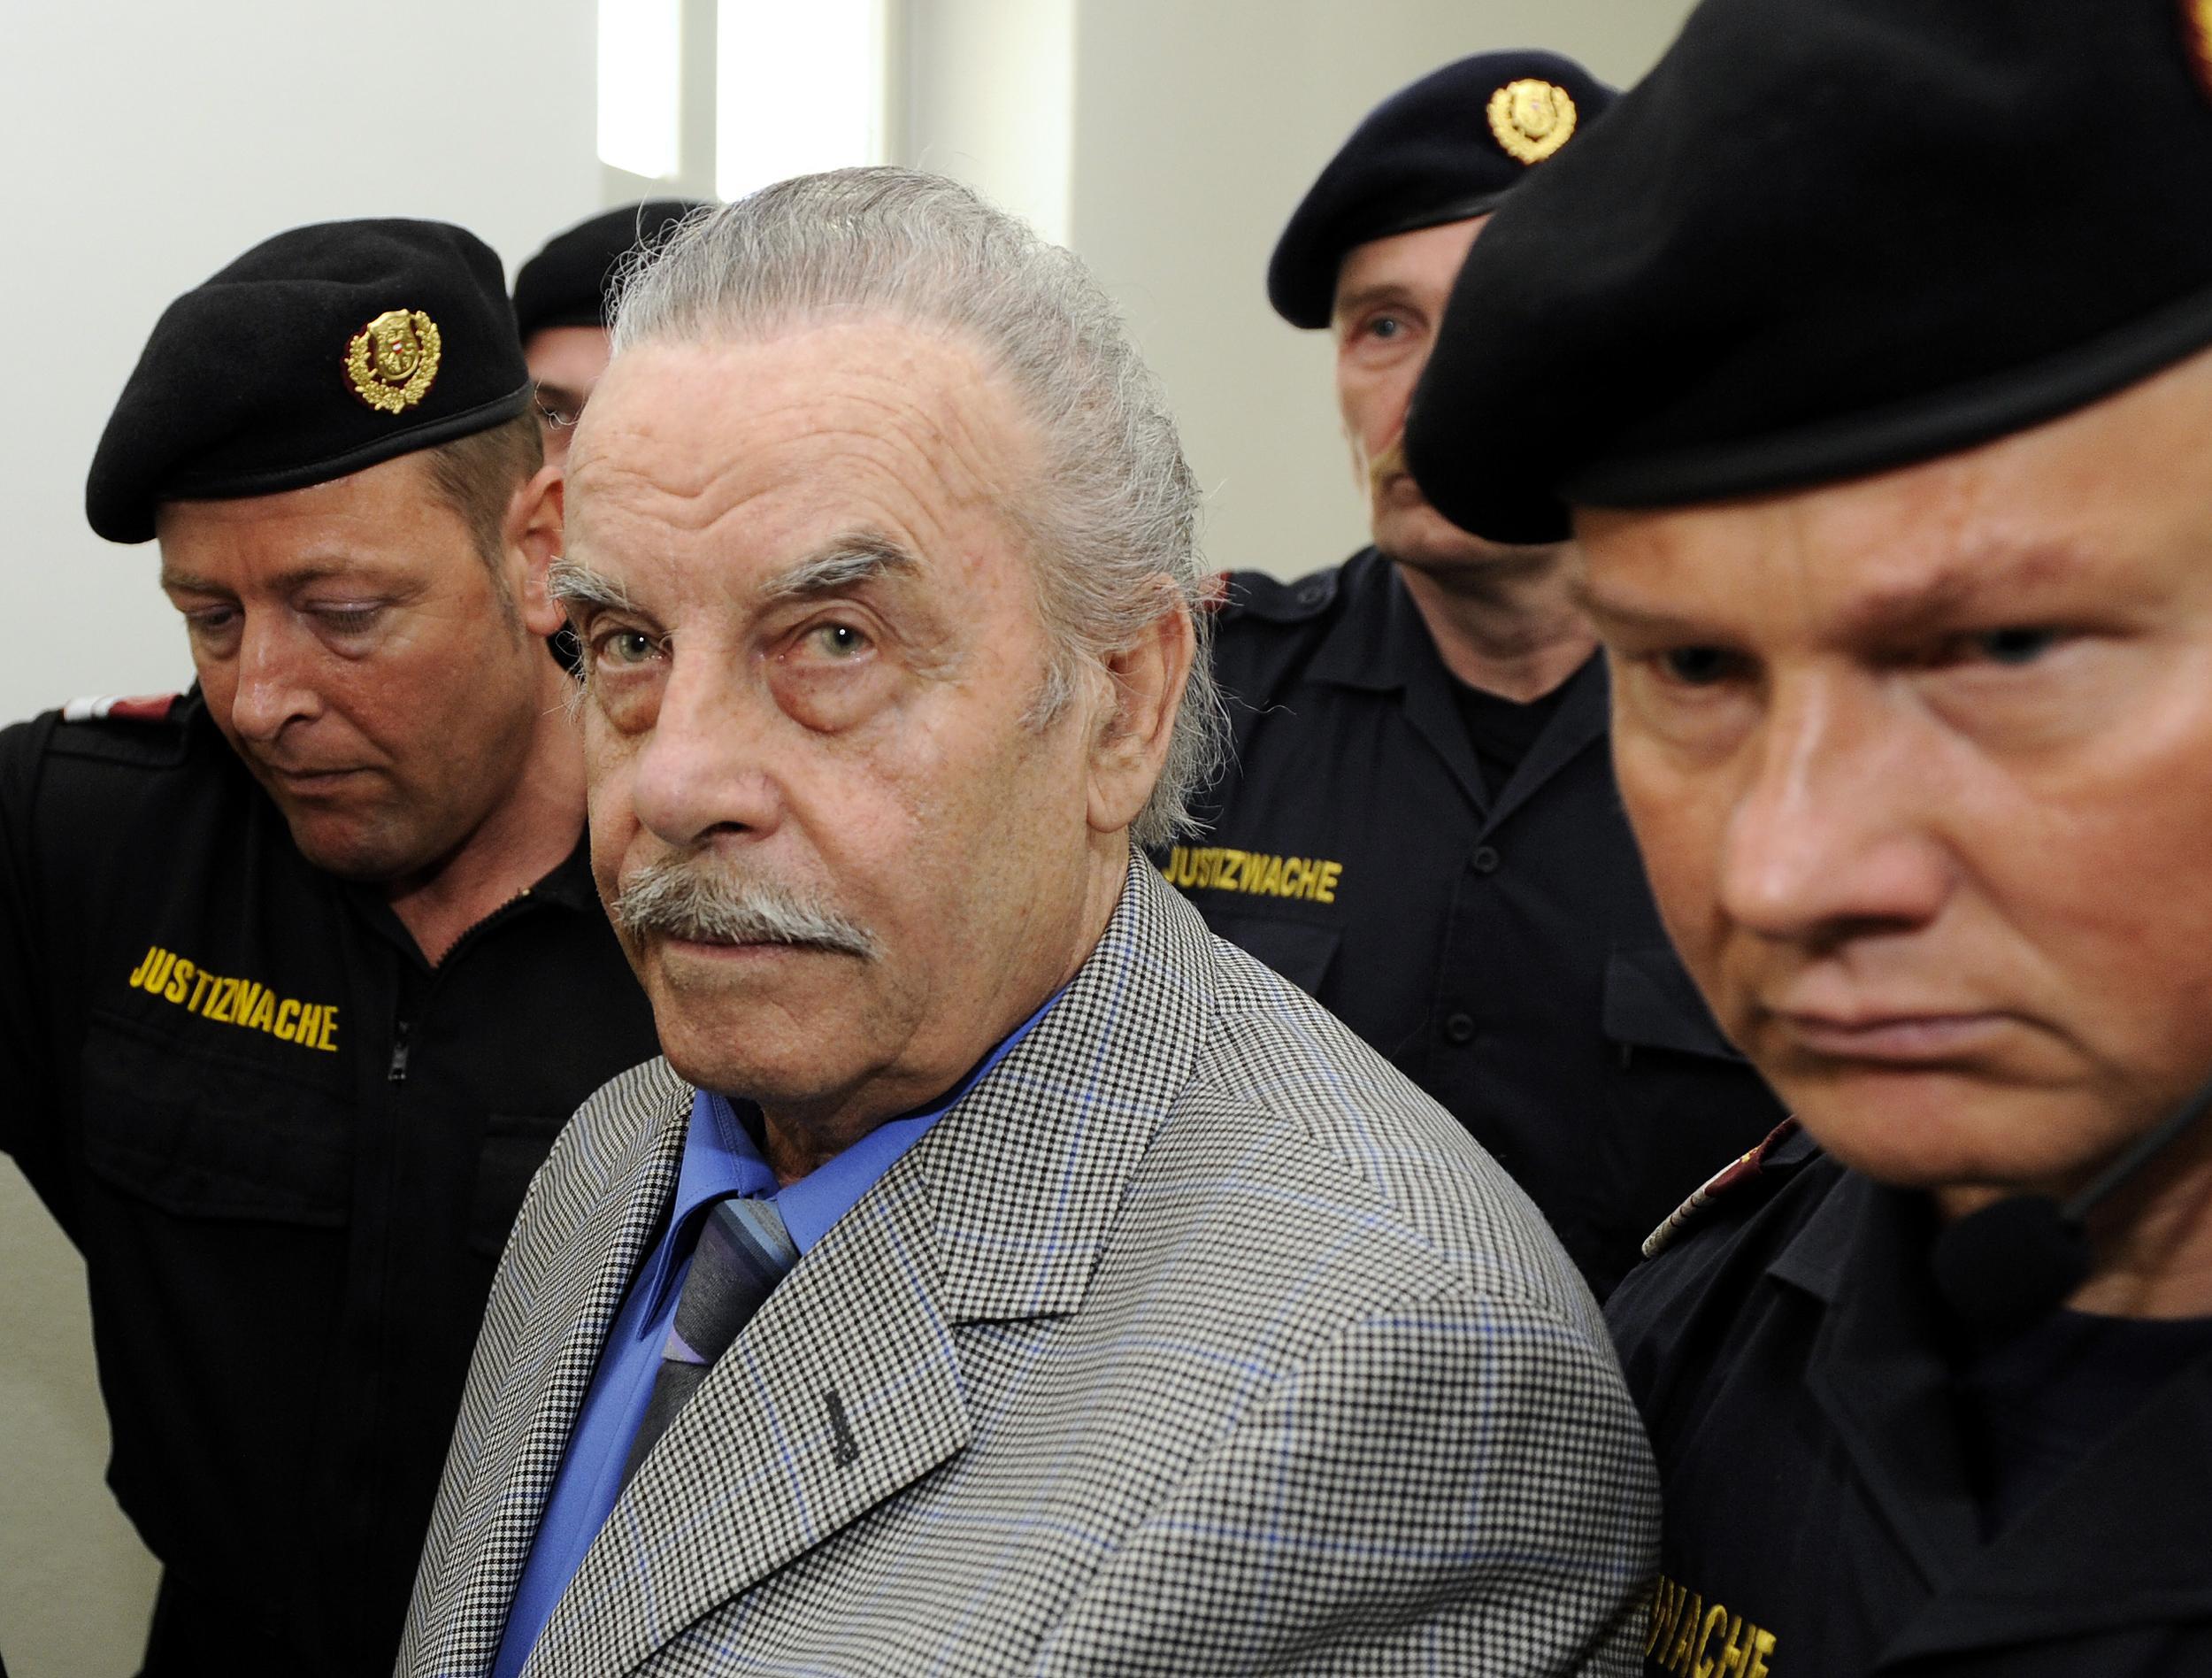 Josef Fritzl arrives at court on trial for incest and murder on March 19, 2009